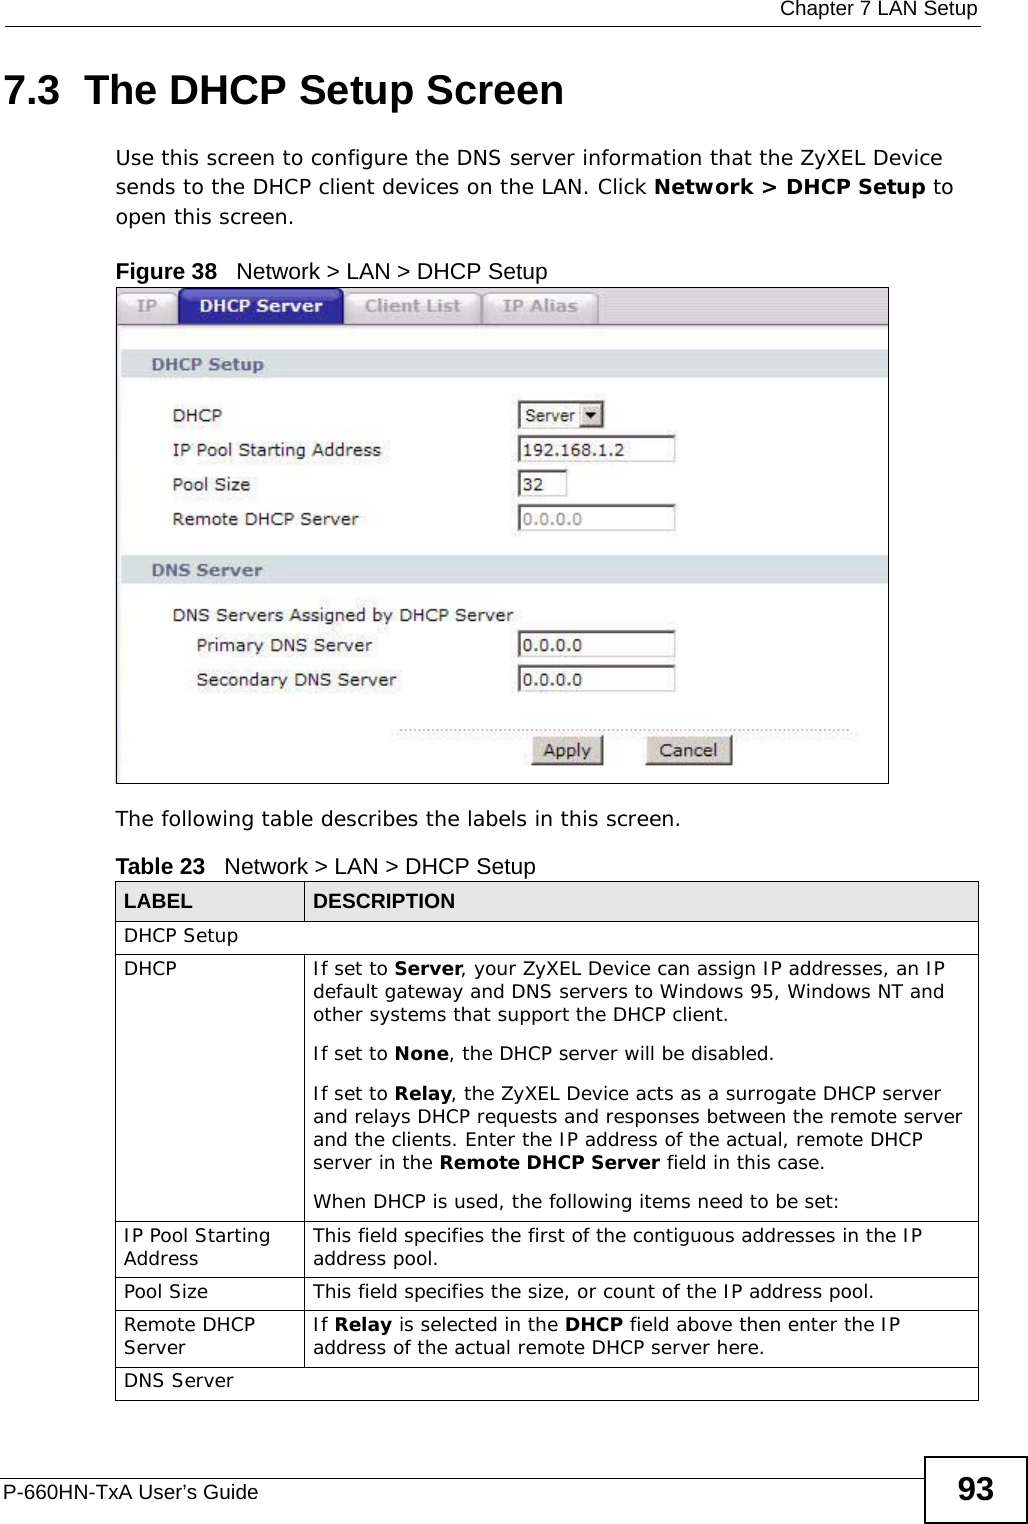  Chapter 7 LAN SetupP-660HN-TxA User’s Guide 937.3  The DHCP Setup ScreenUse this screen to configure the DNS server information that the ZyXEL Device sends to the DHCP client devices on the LAN. Click Network &gt; DHCP Setup to open this screen.Figure 38   Network &gt; LAN &gt; DHCP SetupThe following table describes the labels in this screen.Table 23   Network &gt; LAN &gt; DHCP Setup LABEL DESCRIPTIONDHCP SetupDHCP If set to Server, your ZyXEL Device can assign IP addresses, an IP default gateway and DNS servers to Windows 95, Windows NT and other systems that support the DHCP client.If set to None, the DHCP server will be disabled. If set to Relay, the ZyXEL Device acts as a surrogate DHCP server and relays DHCP requests and responses between the remote server and the clients. Enter the IP address of the actual, remote DHCP server in the Remote DHCP Server field in this case. When DHCP is used, the following items need to be set: IP Pool Starting Address This field specifies the first of the contiguous addresses in the IP address pool.Pool Size This field specifies the size, or count of the IP address pool.Remote DHCP Server If Relay is selected in the DHCP field above then enter the IP address of the actual remote DHCP server here.DNS Server